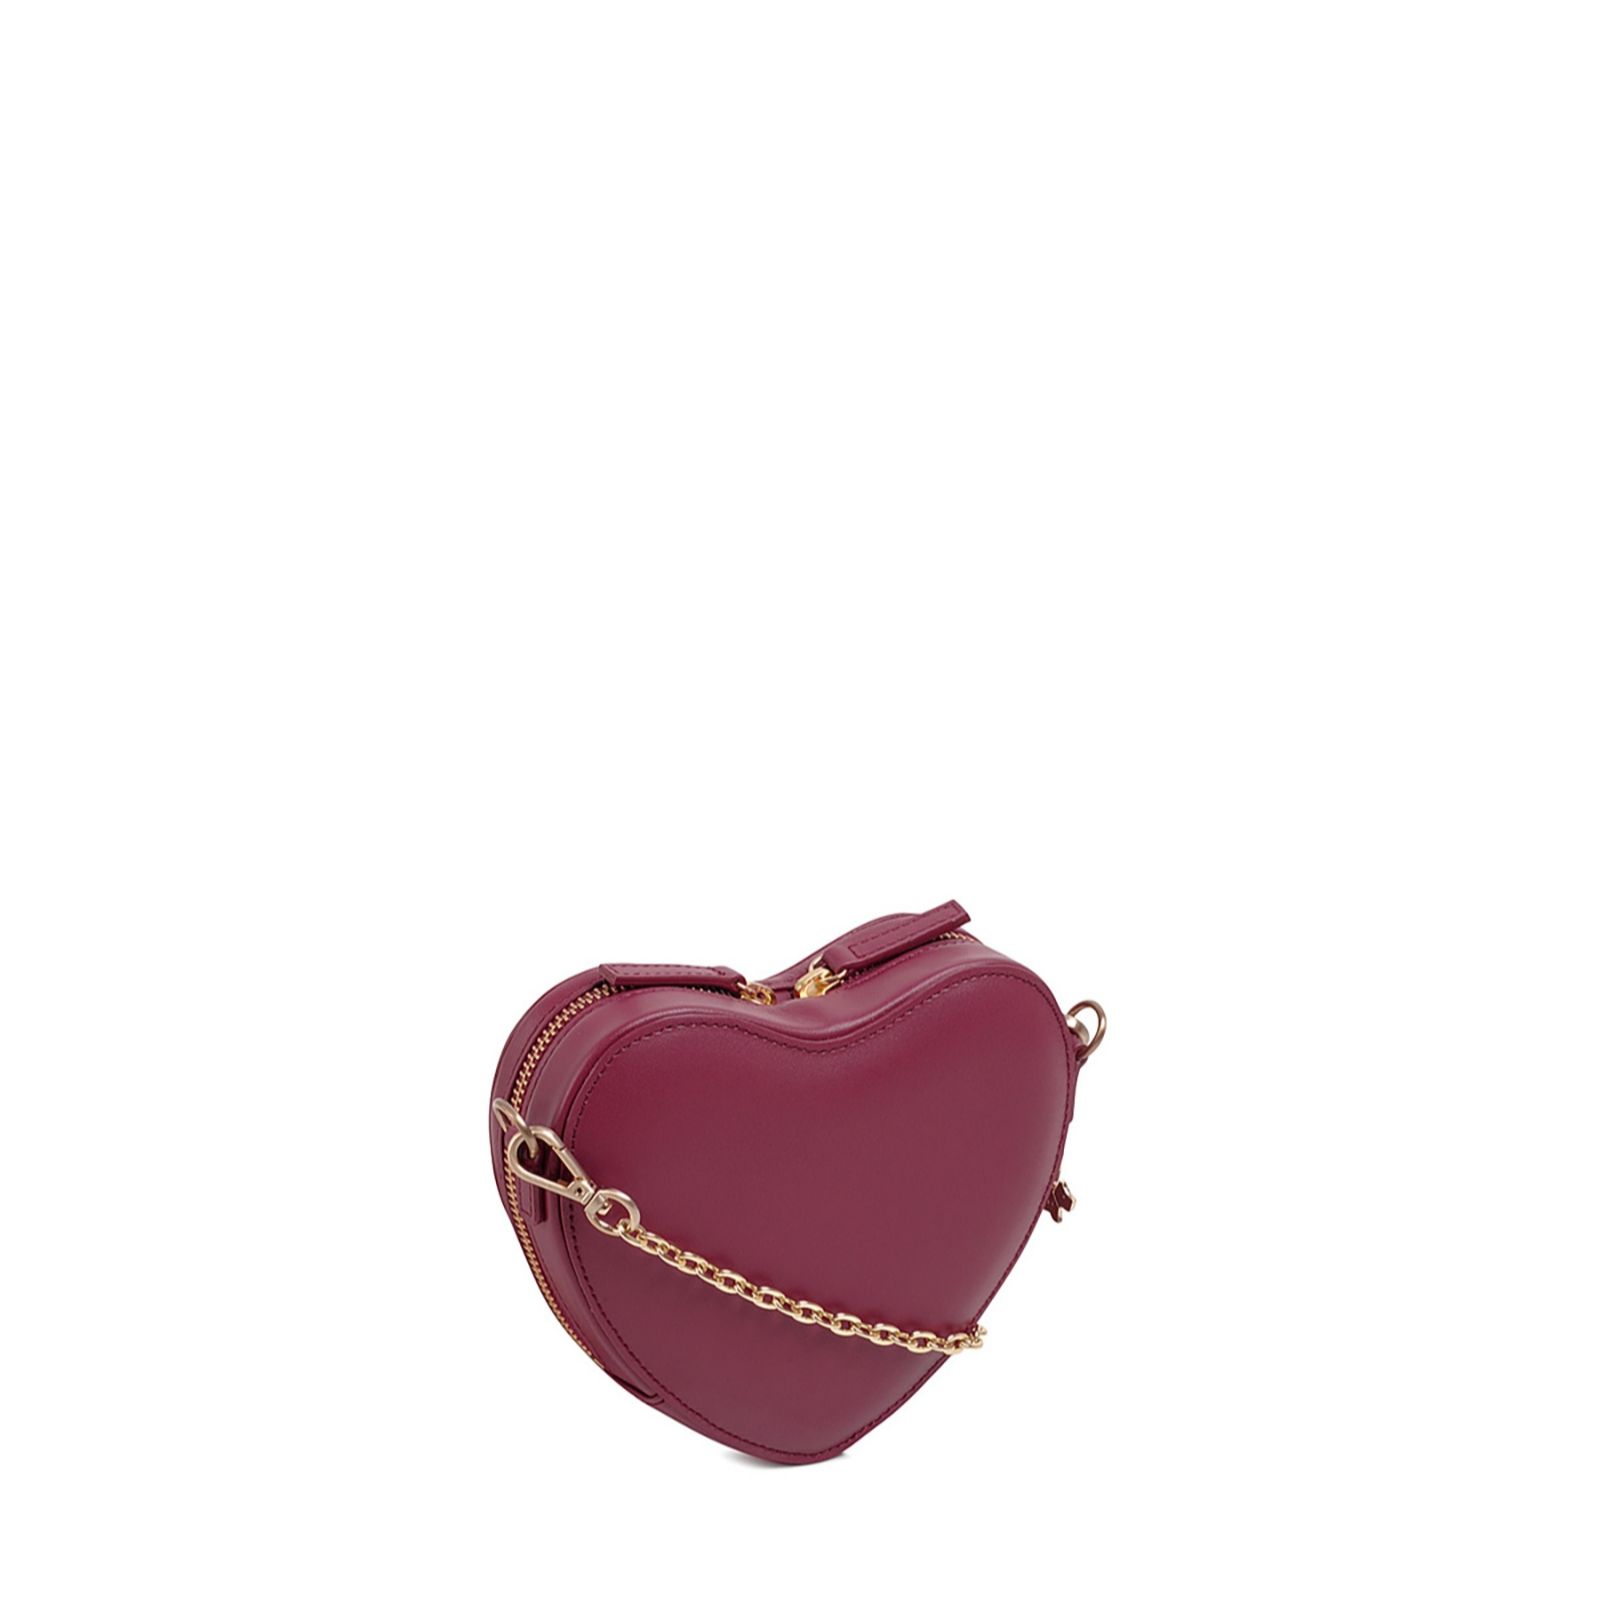 Radley London Blush Love Potion Heart Leather Crossbody Bag, Best Price  and Reviews